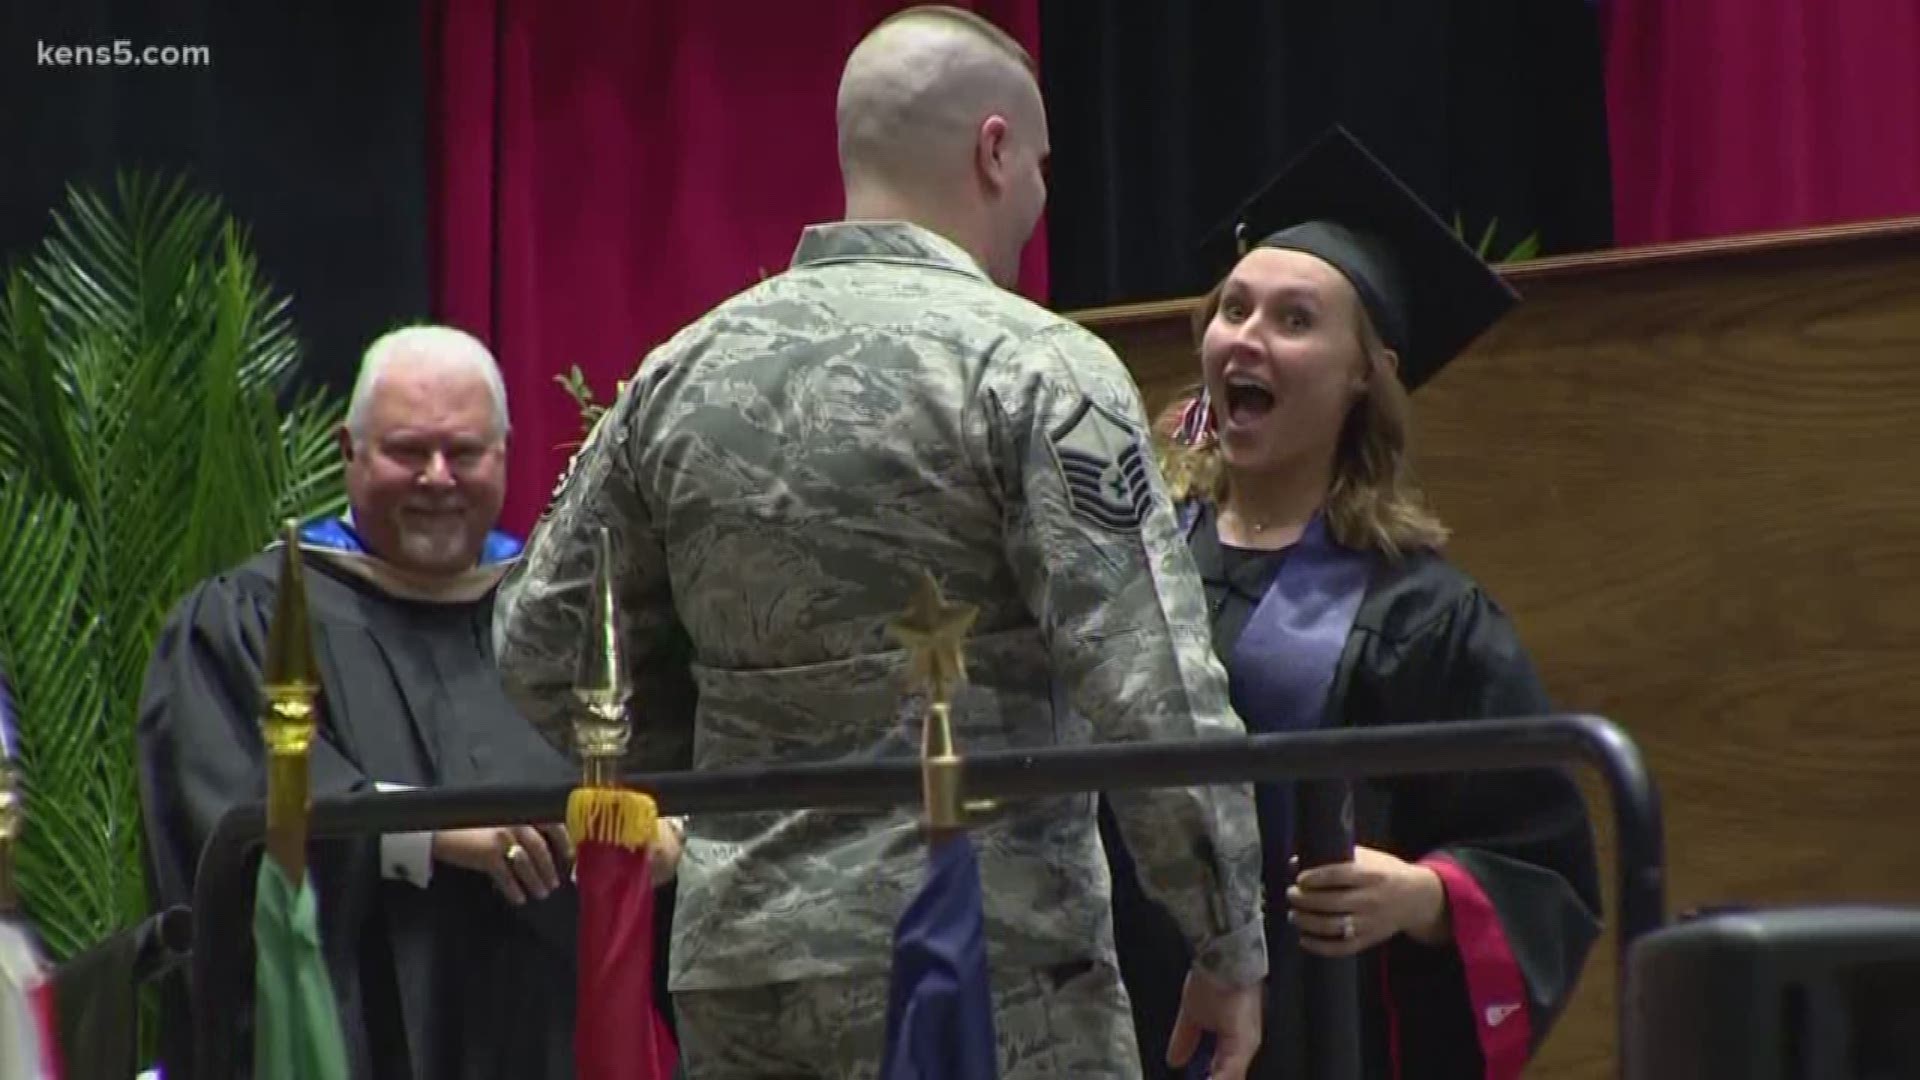 On Saturday, not only did one UIW student receive her degree in what became a very special ceremony, but her husband was waiting for her after returning from a 13-month deployment as part of the U.S. Air Force.